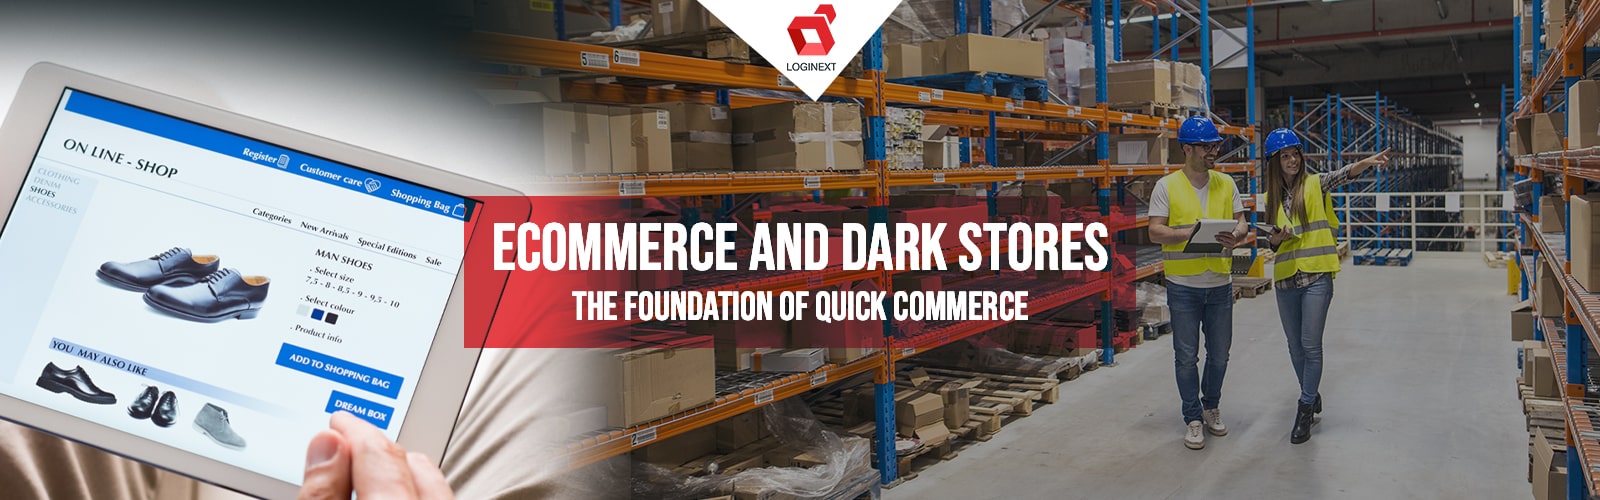 What is a Dark Store? And the Future of Retail